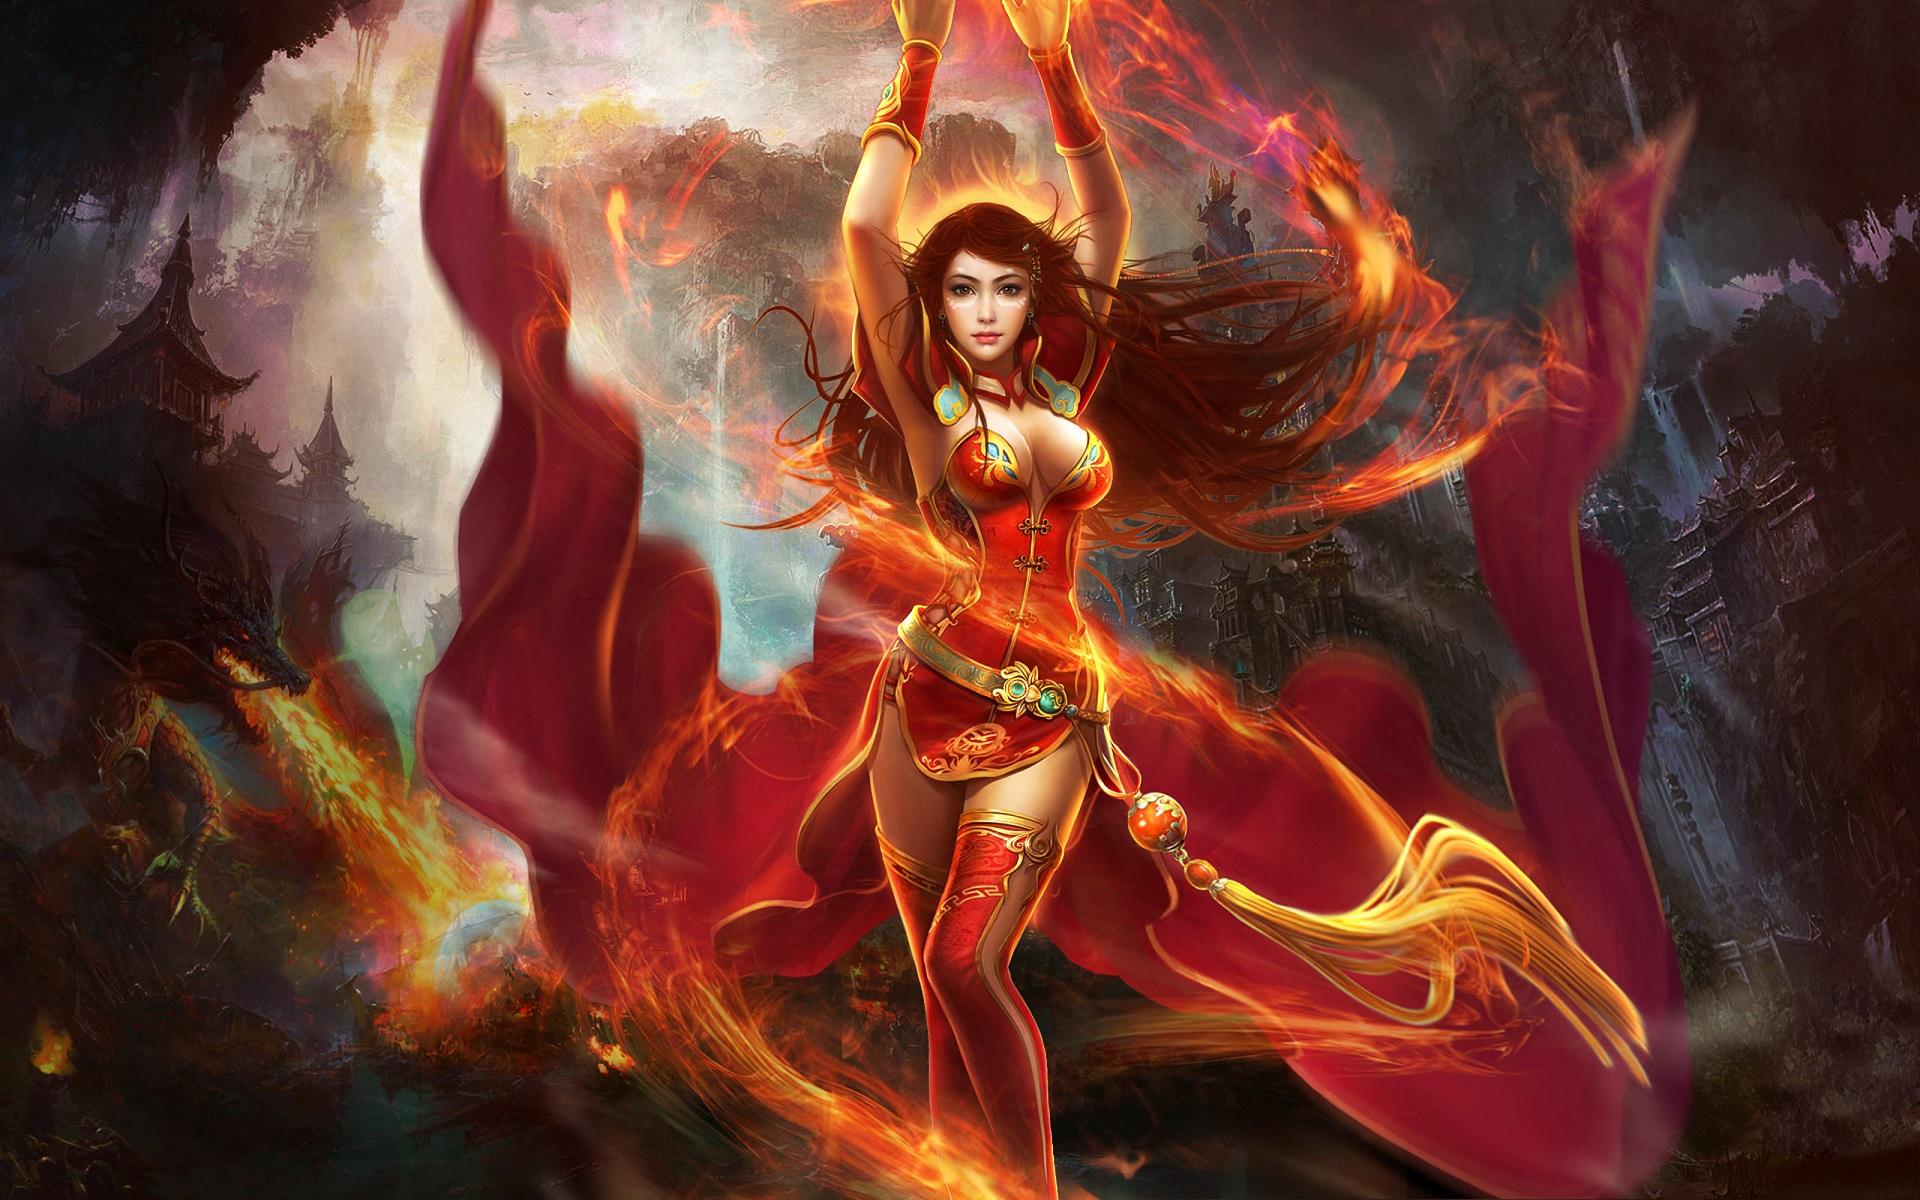 Best 53+ Lina Inverse Wallpapers on HipWallpapers.